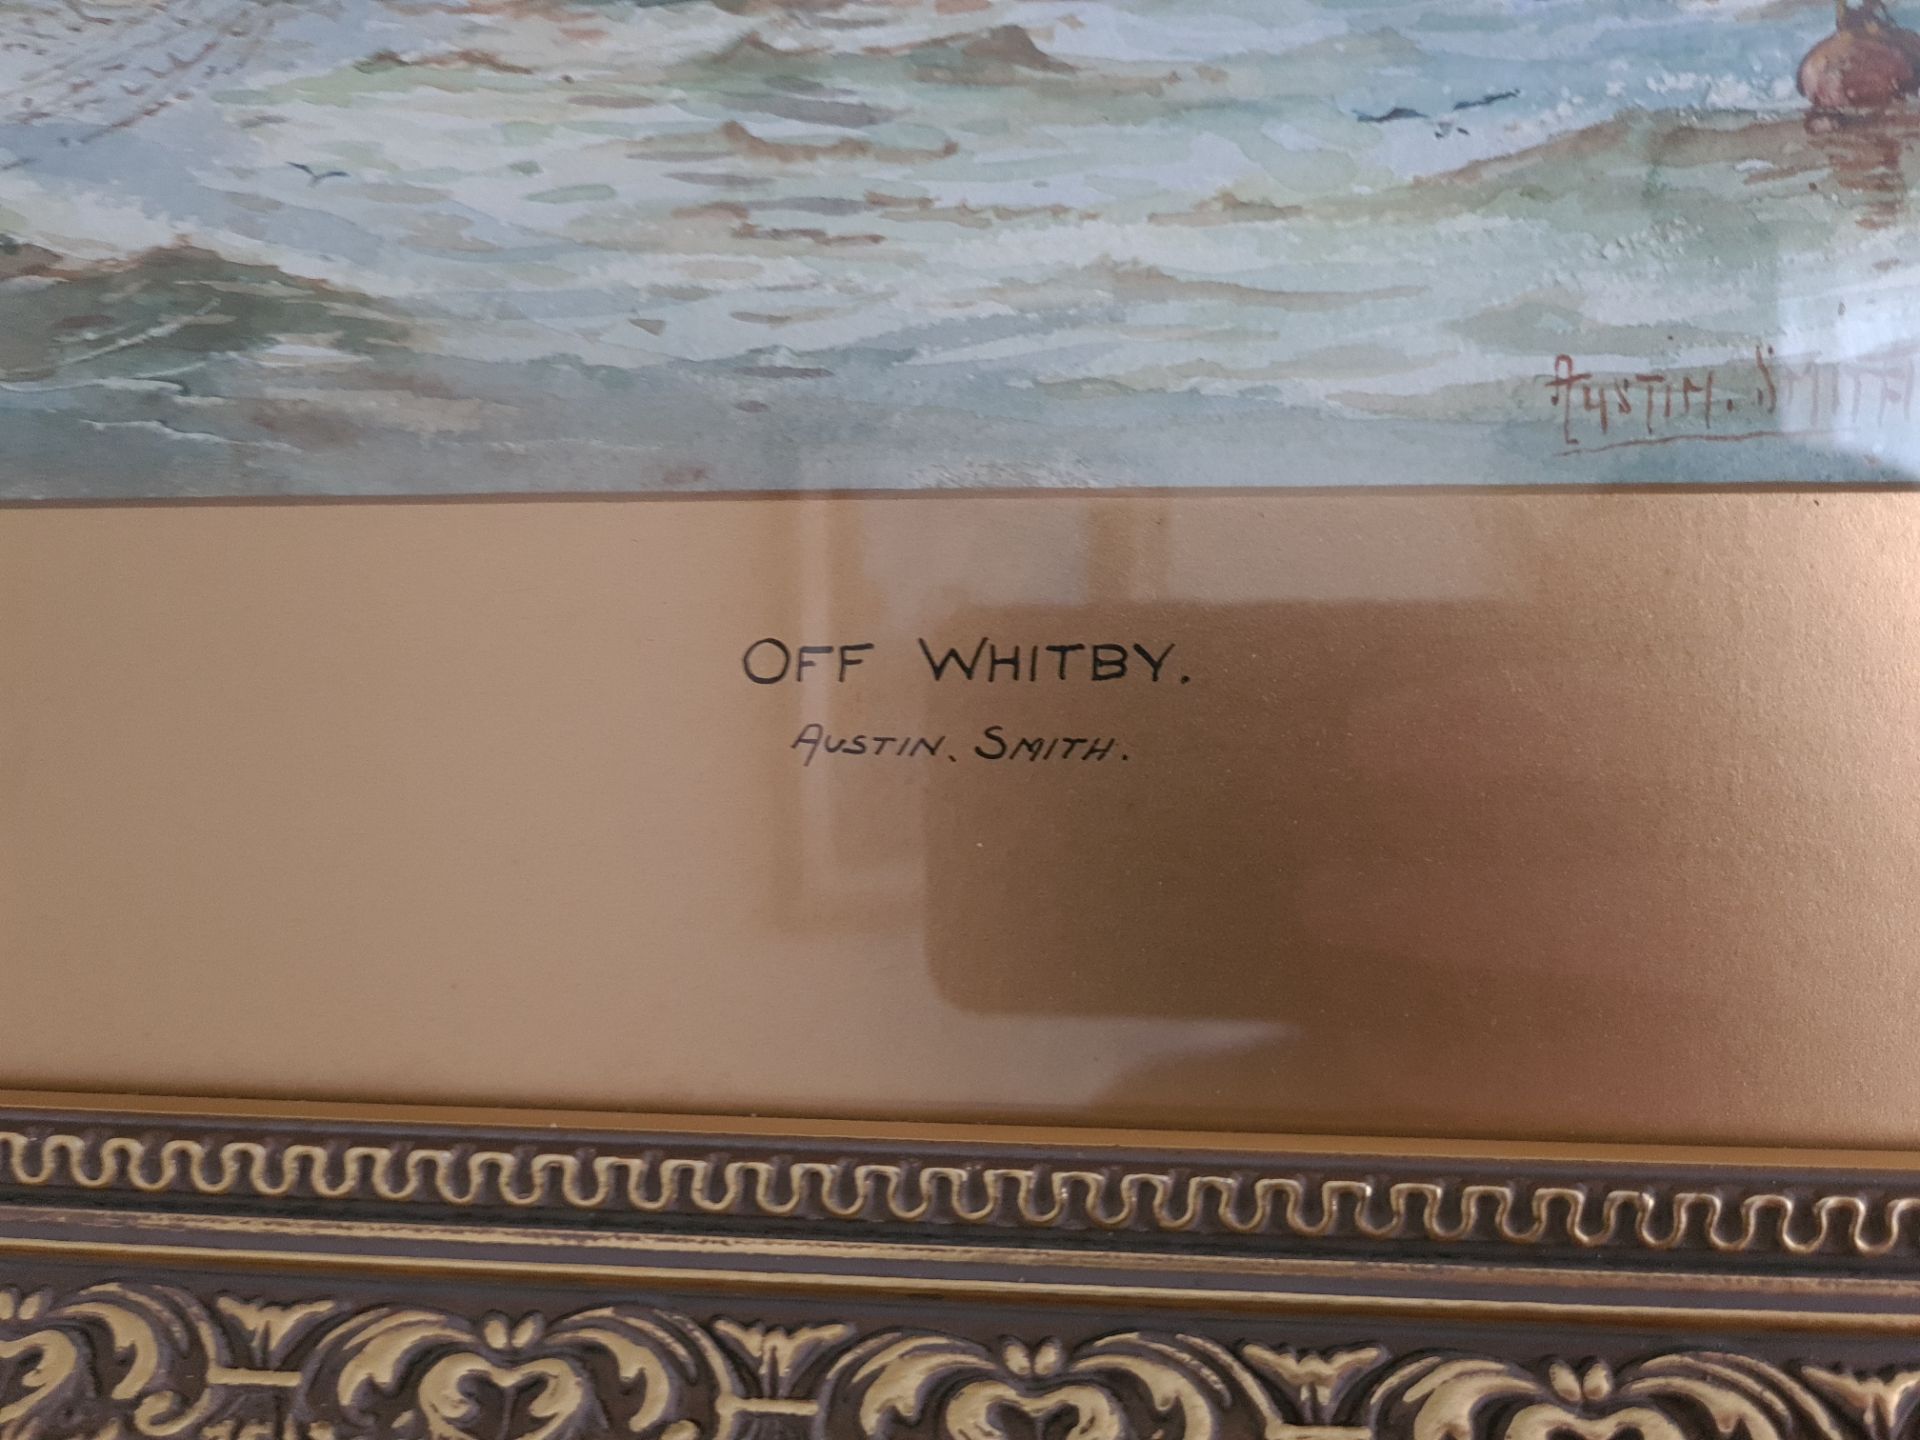 Signed and Titled Framed Watercolour 'Off Whitby' by Anton Smith, 37cm x 45cm - Image 3 of 4